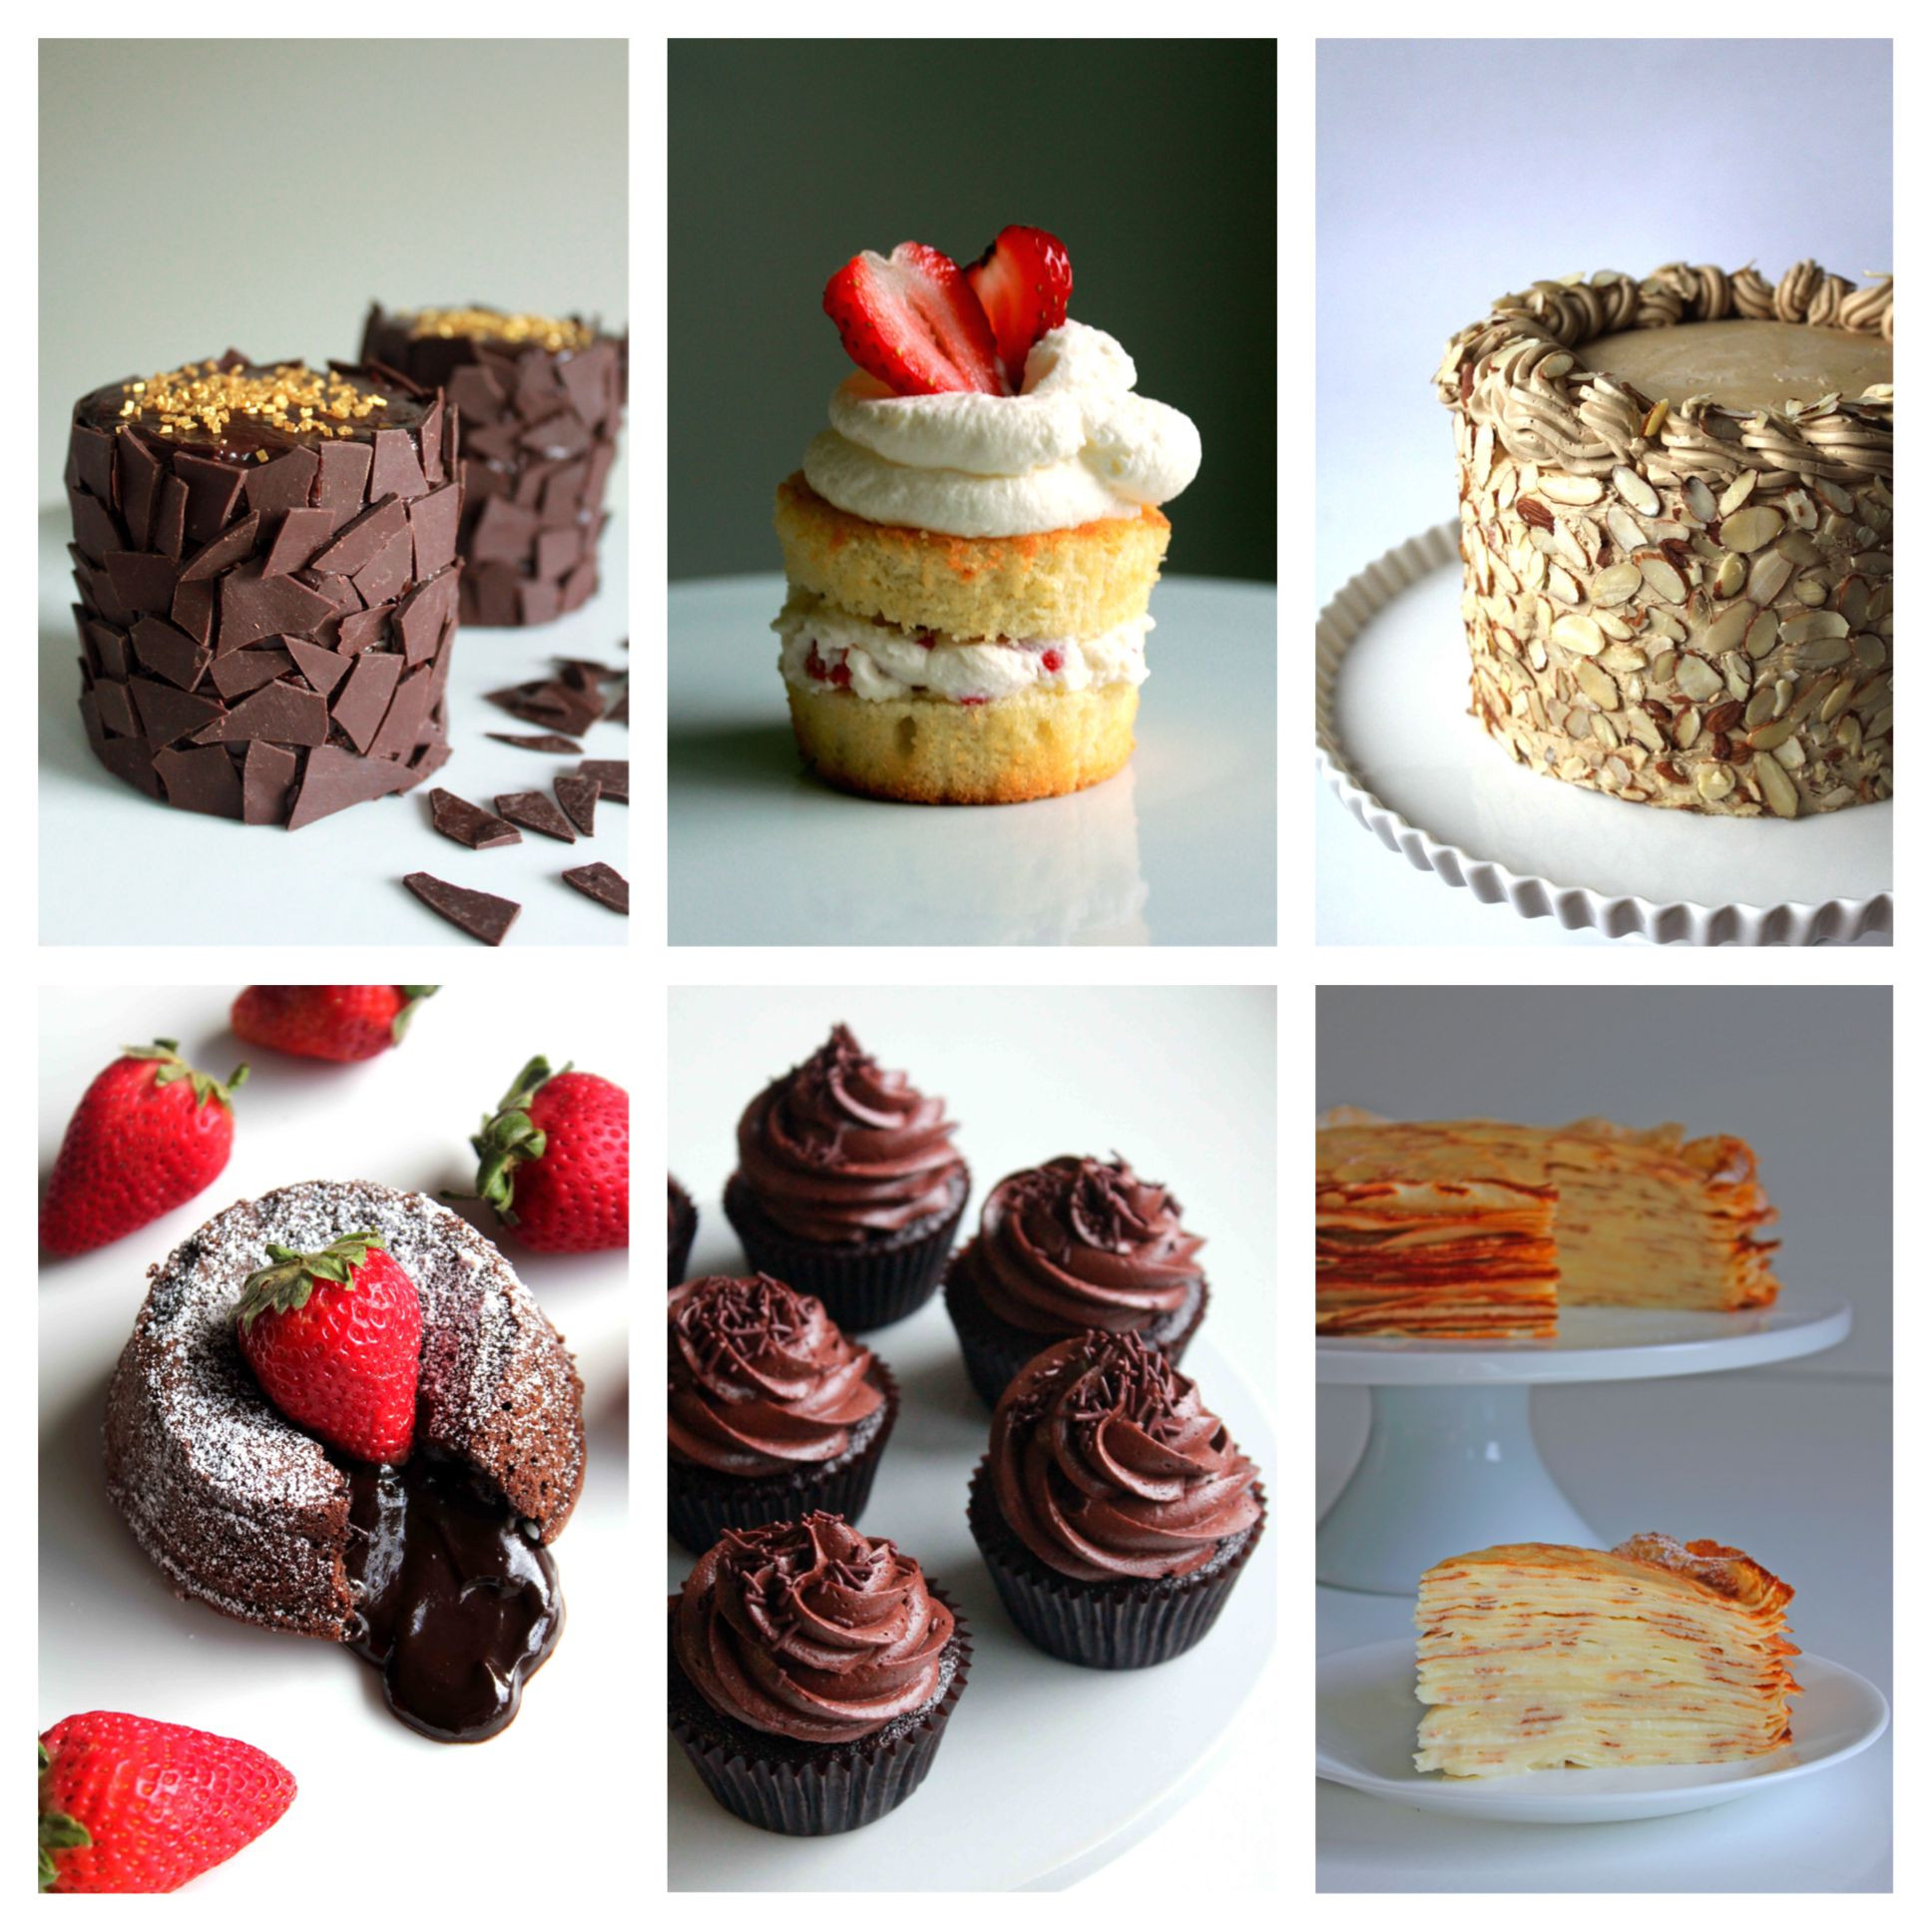 Thanksgiving Desserts For A Crowd
 12 Crowd Pleasing Thanksgiving Desserts By ohsweetday